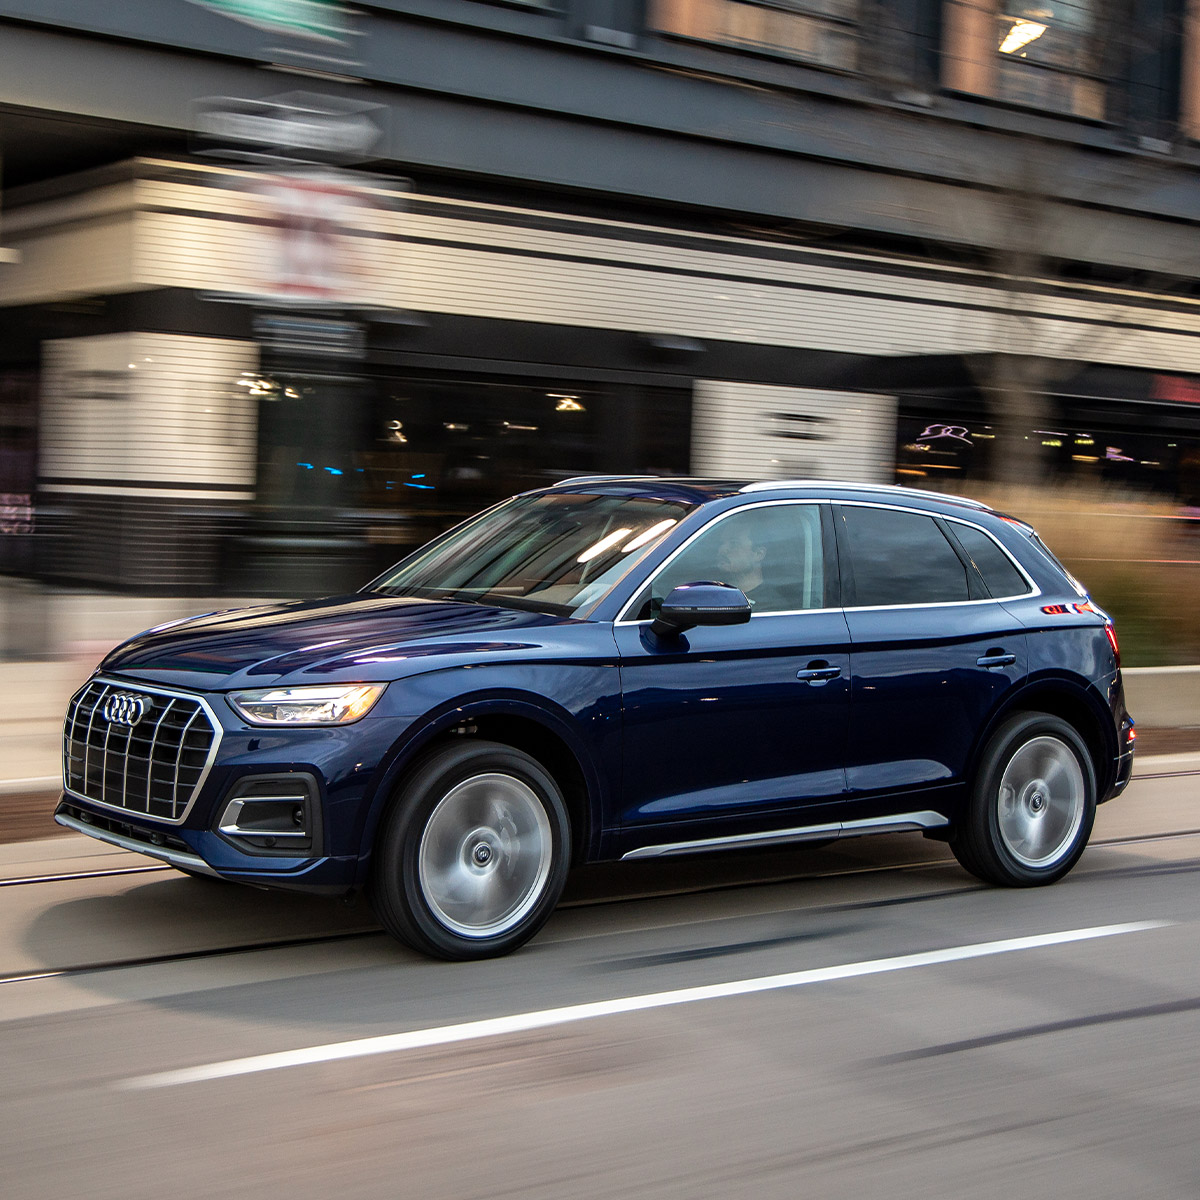 side profile of audi Q5 suv in dark blue color driving down a city street in front of a commercial building